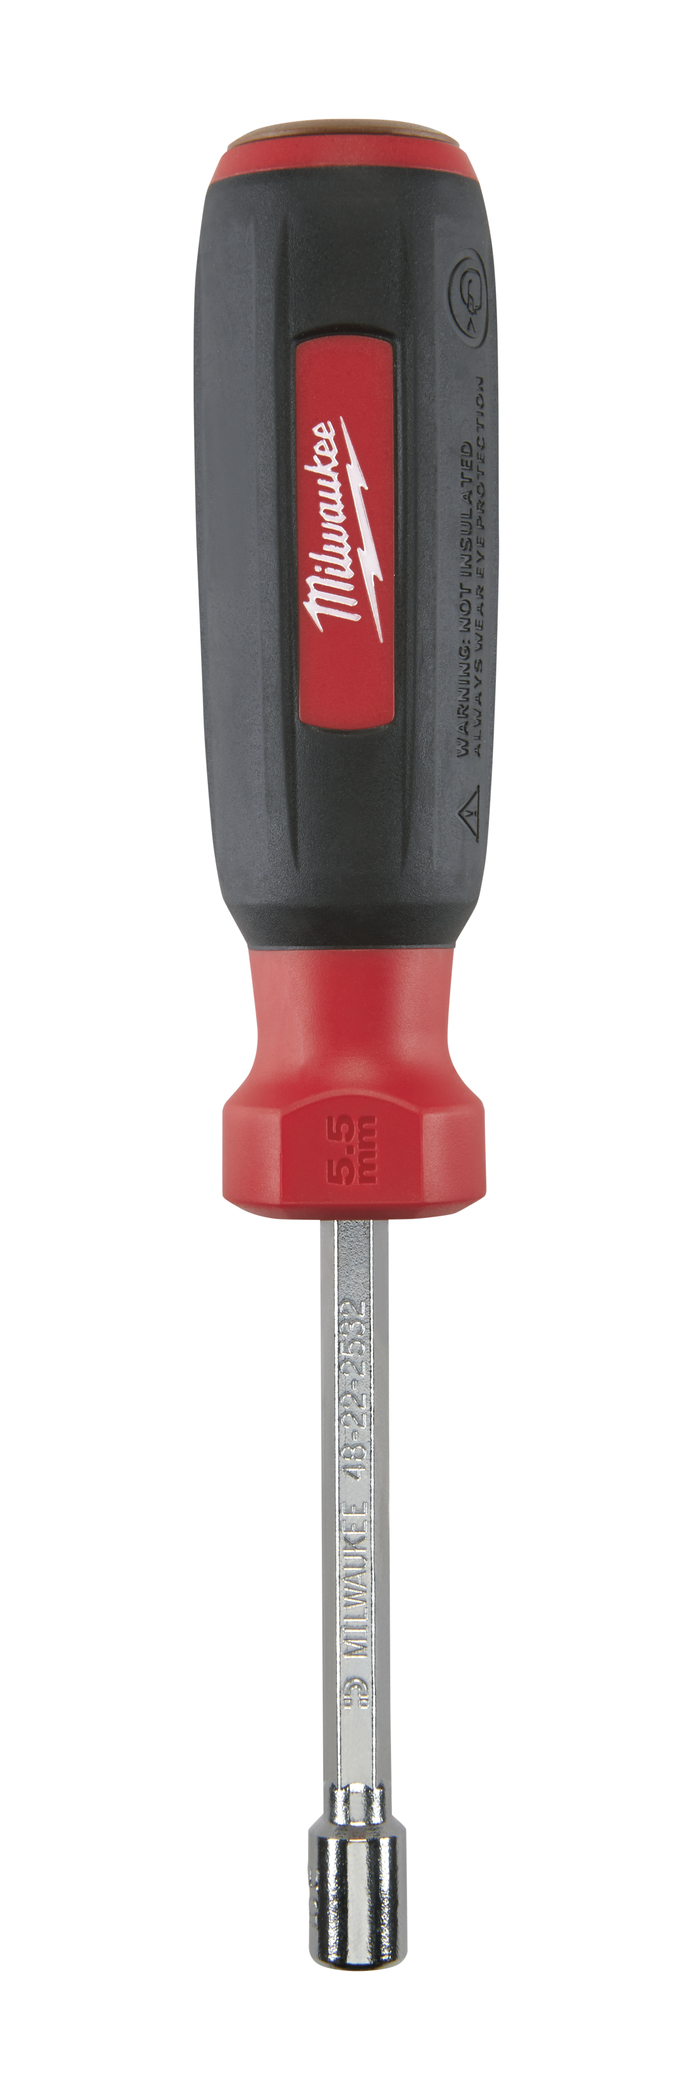 5.5 mm HollowCore Magnetic Nut Driver